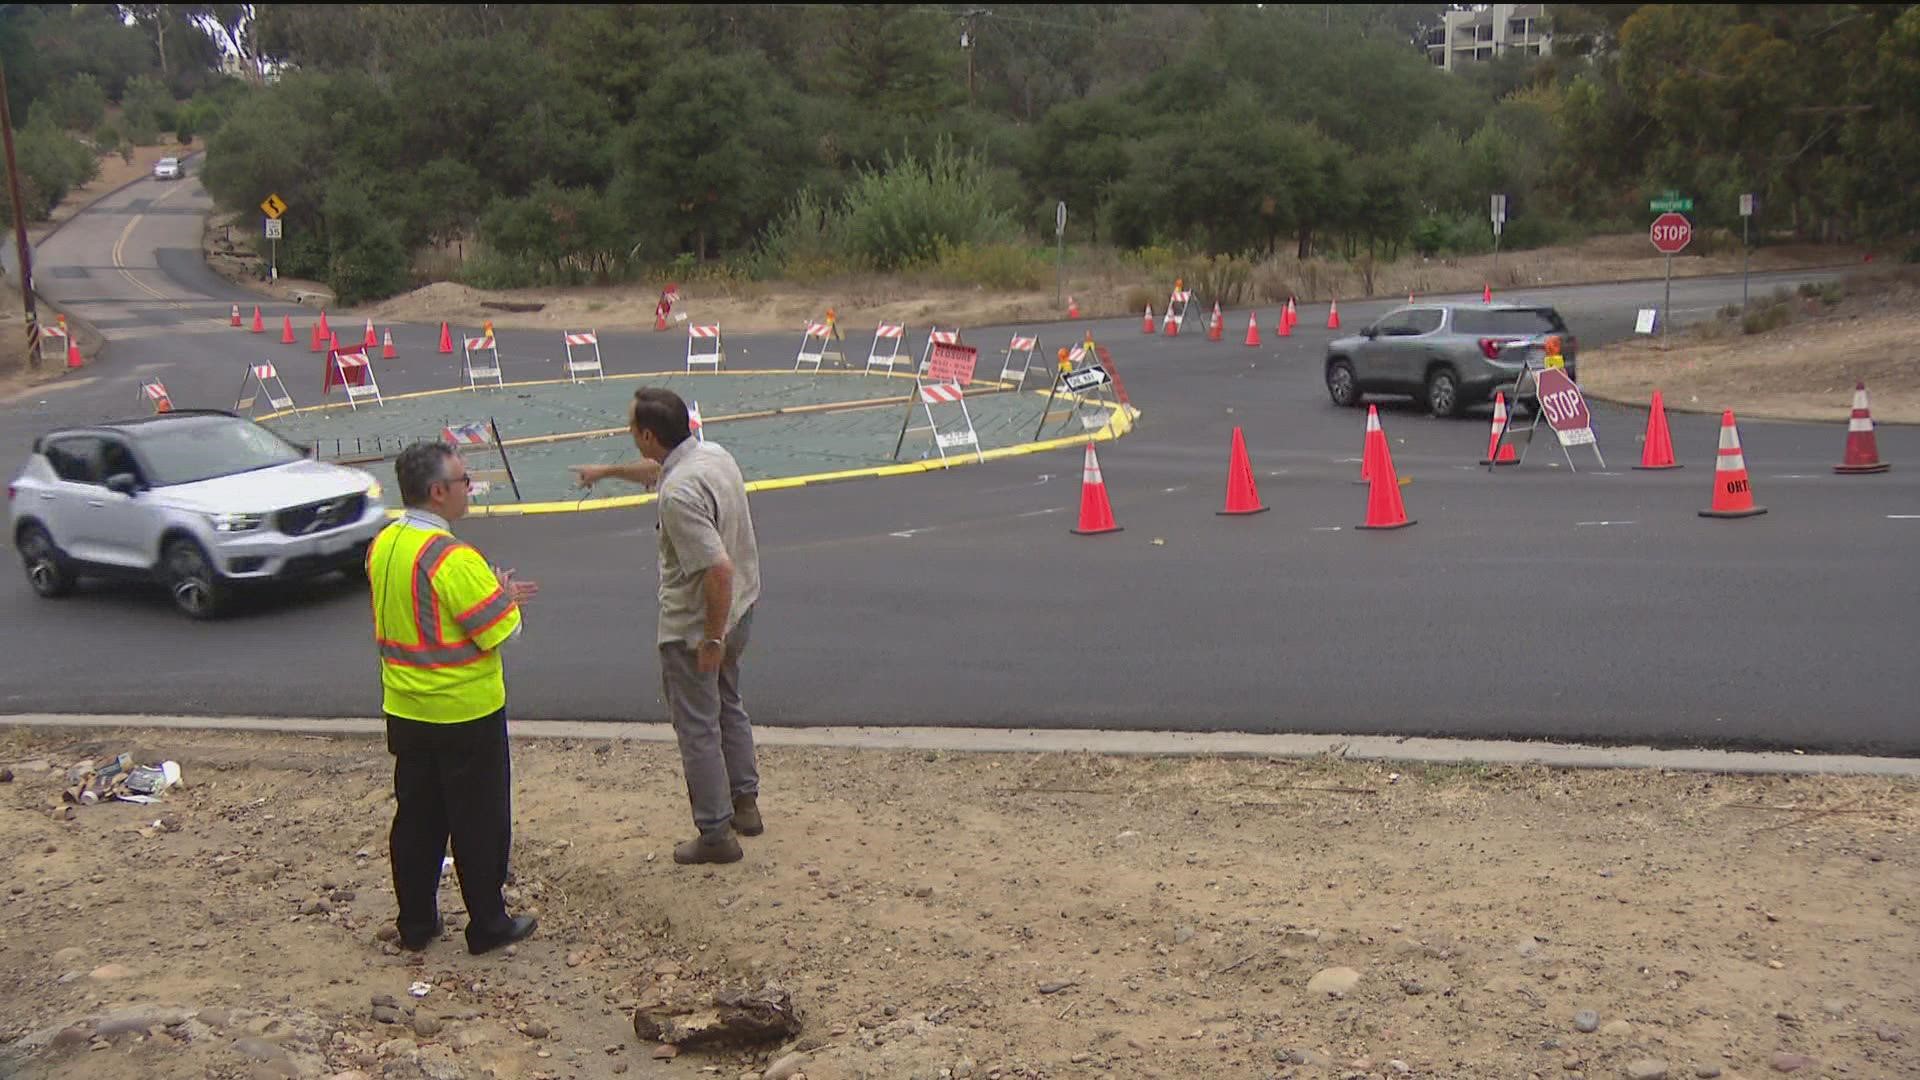 CBS 8 went to the intersection of Morely Field Dr. and Florida Dr., where the city's newest quick build roundabout is located.